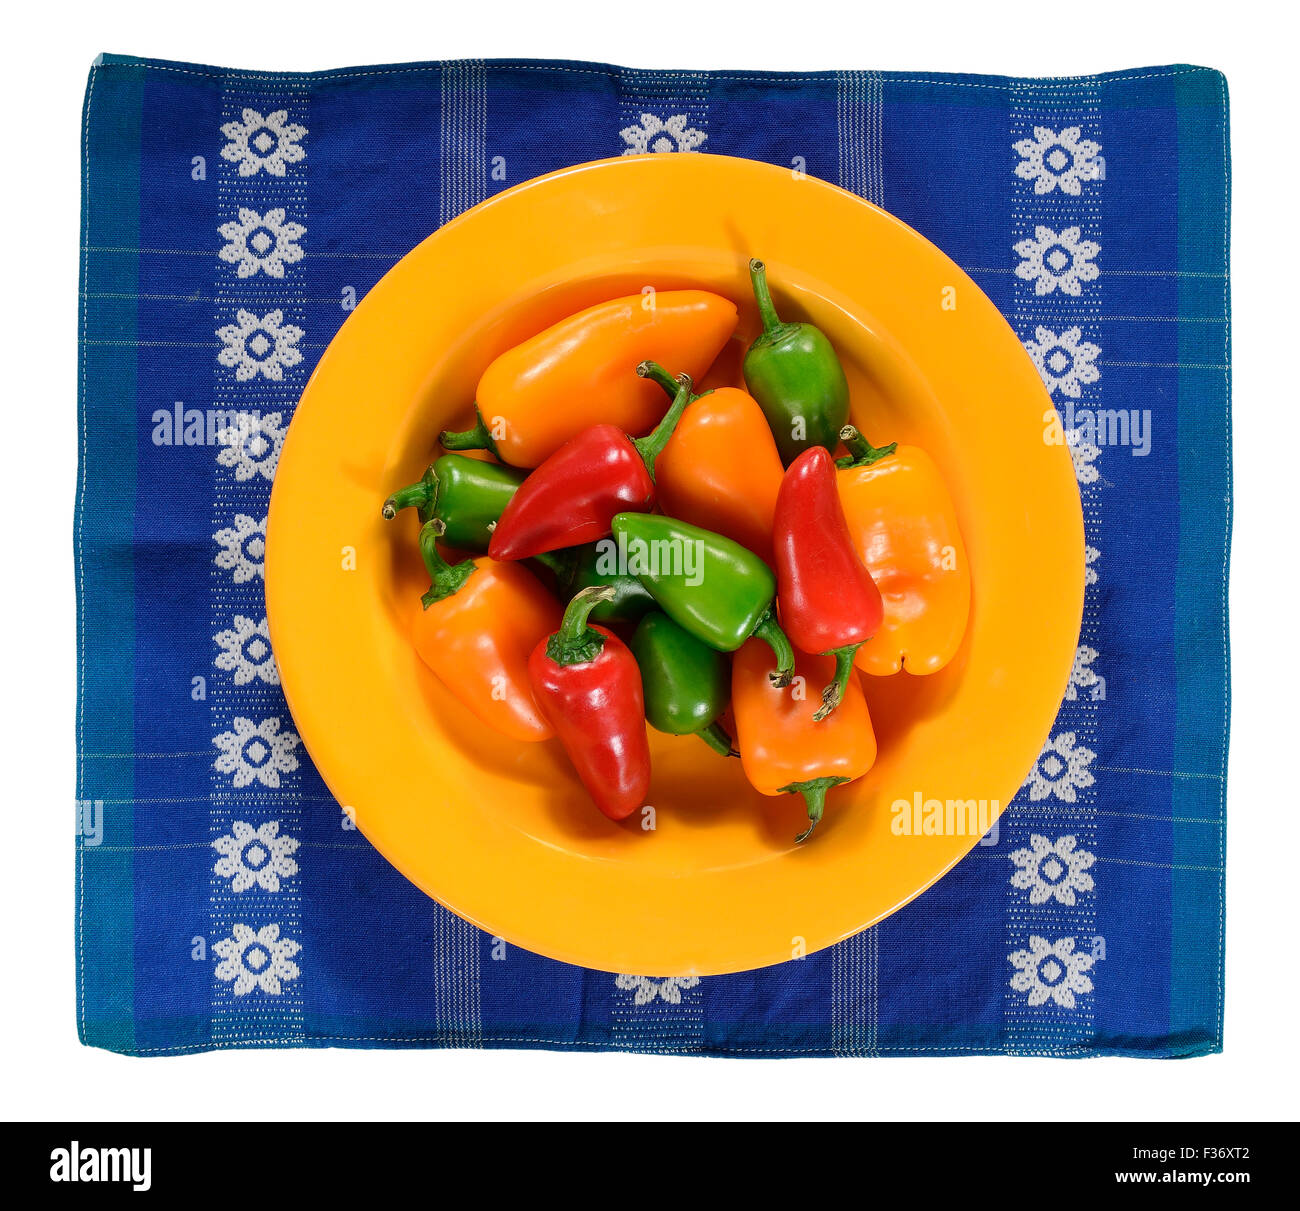 Green, yellow and red hot chilly peppers in plate, isolated on white. Stock Photo